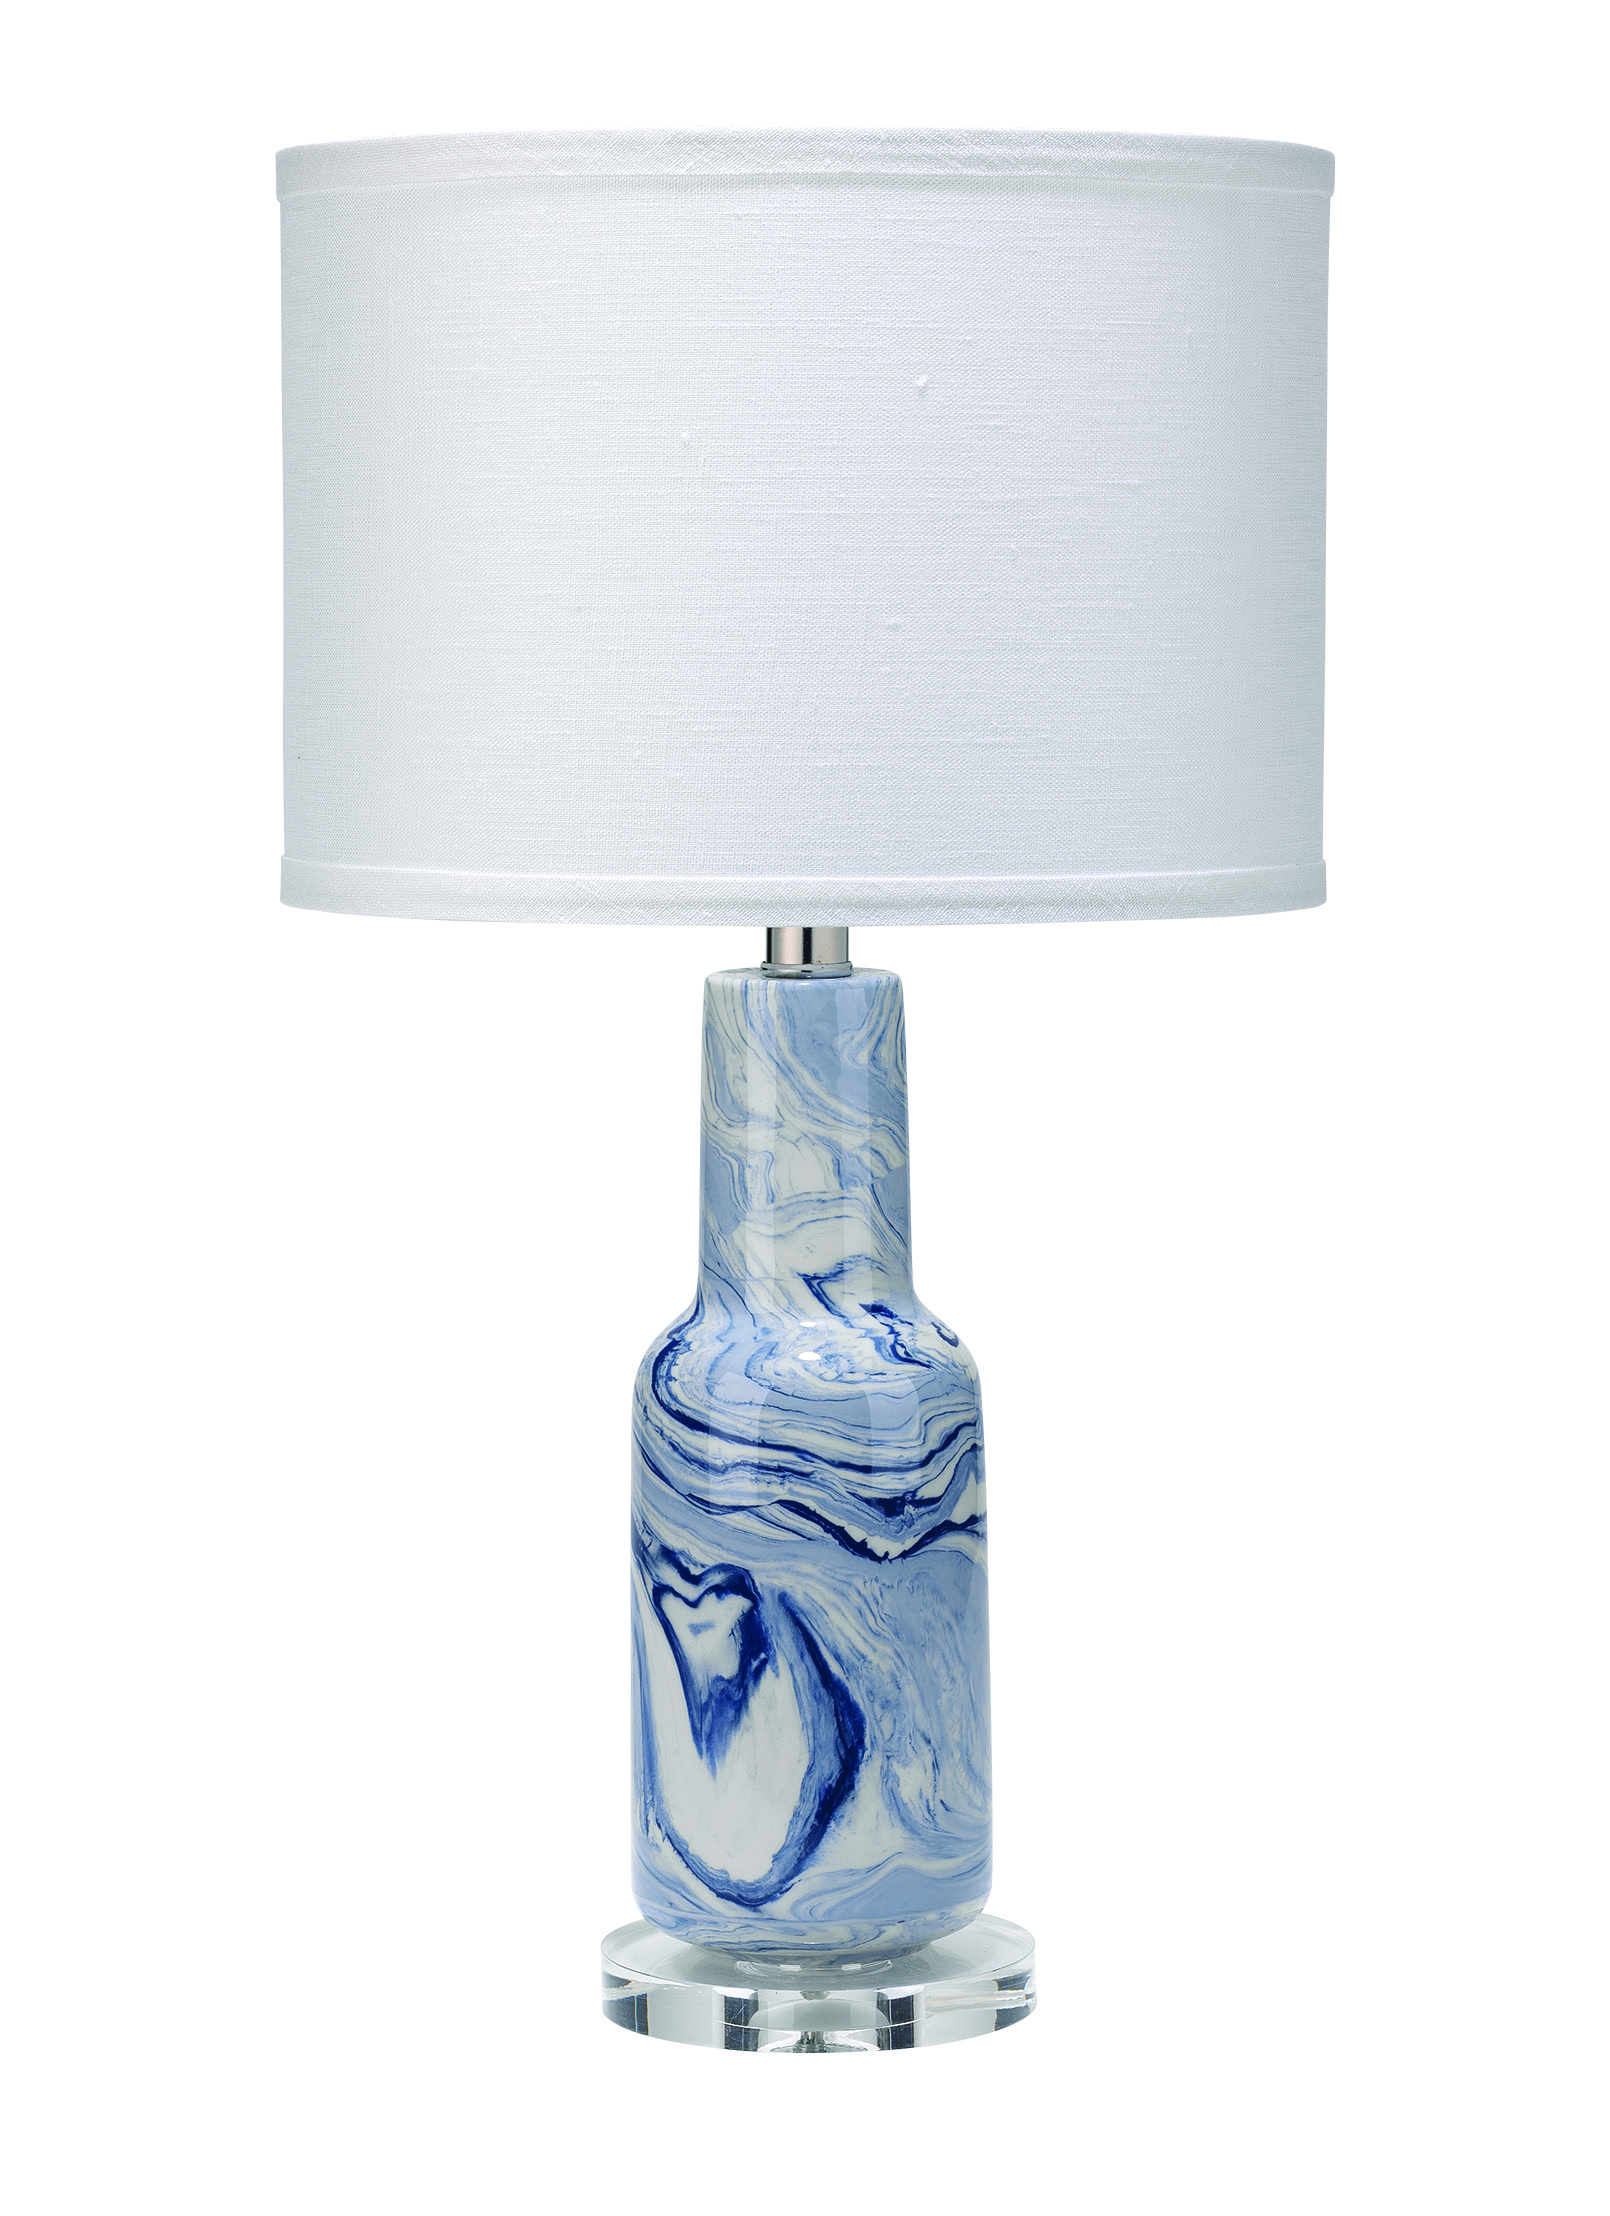 Nebula table lamp in blue and white ceramic from Jamie Young